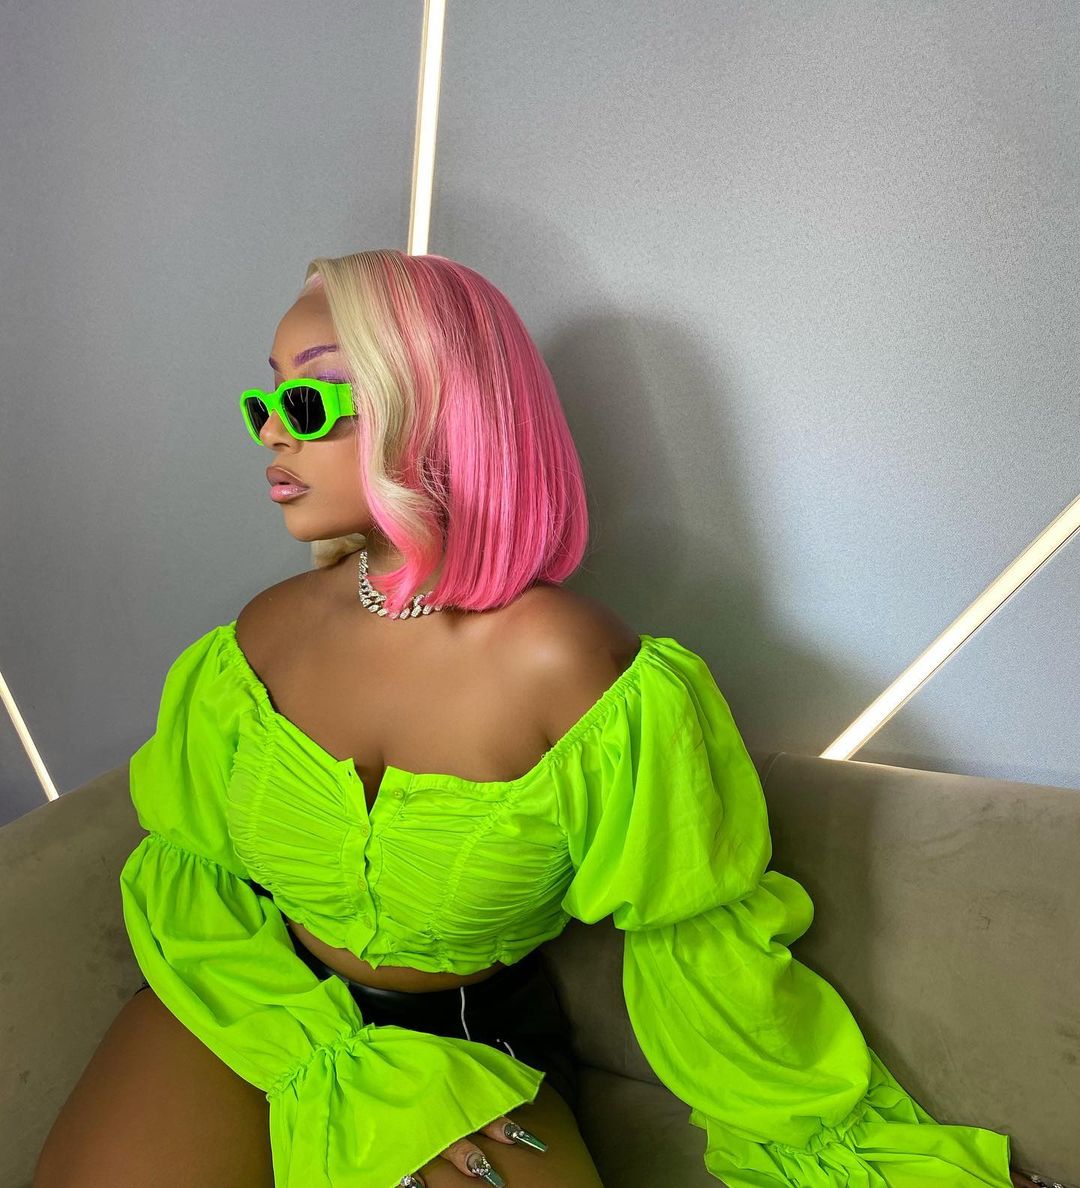 Stefflon Don wearing lime green crop top and sunglasses